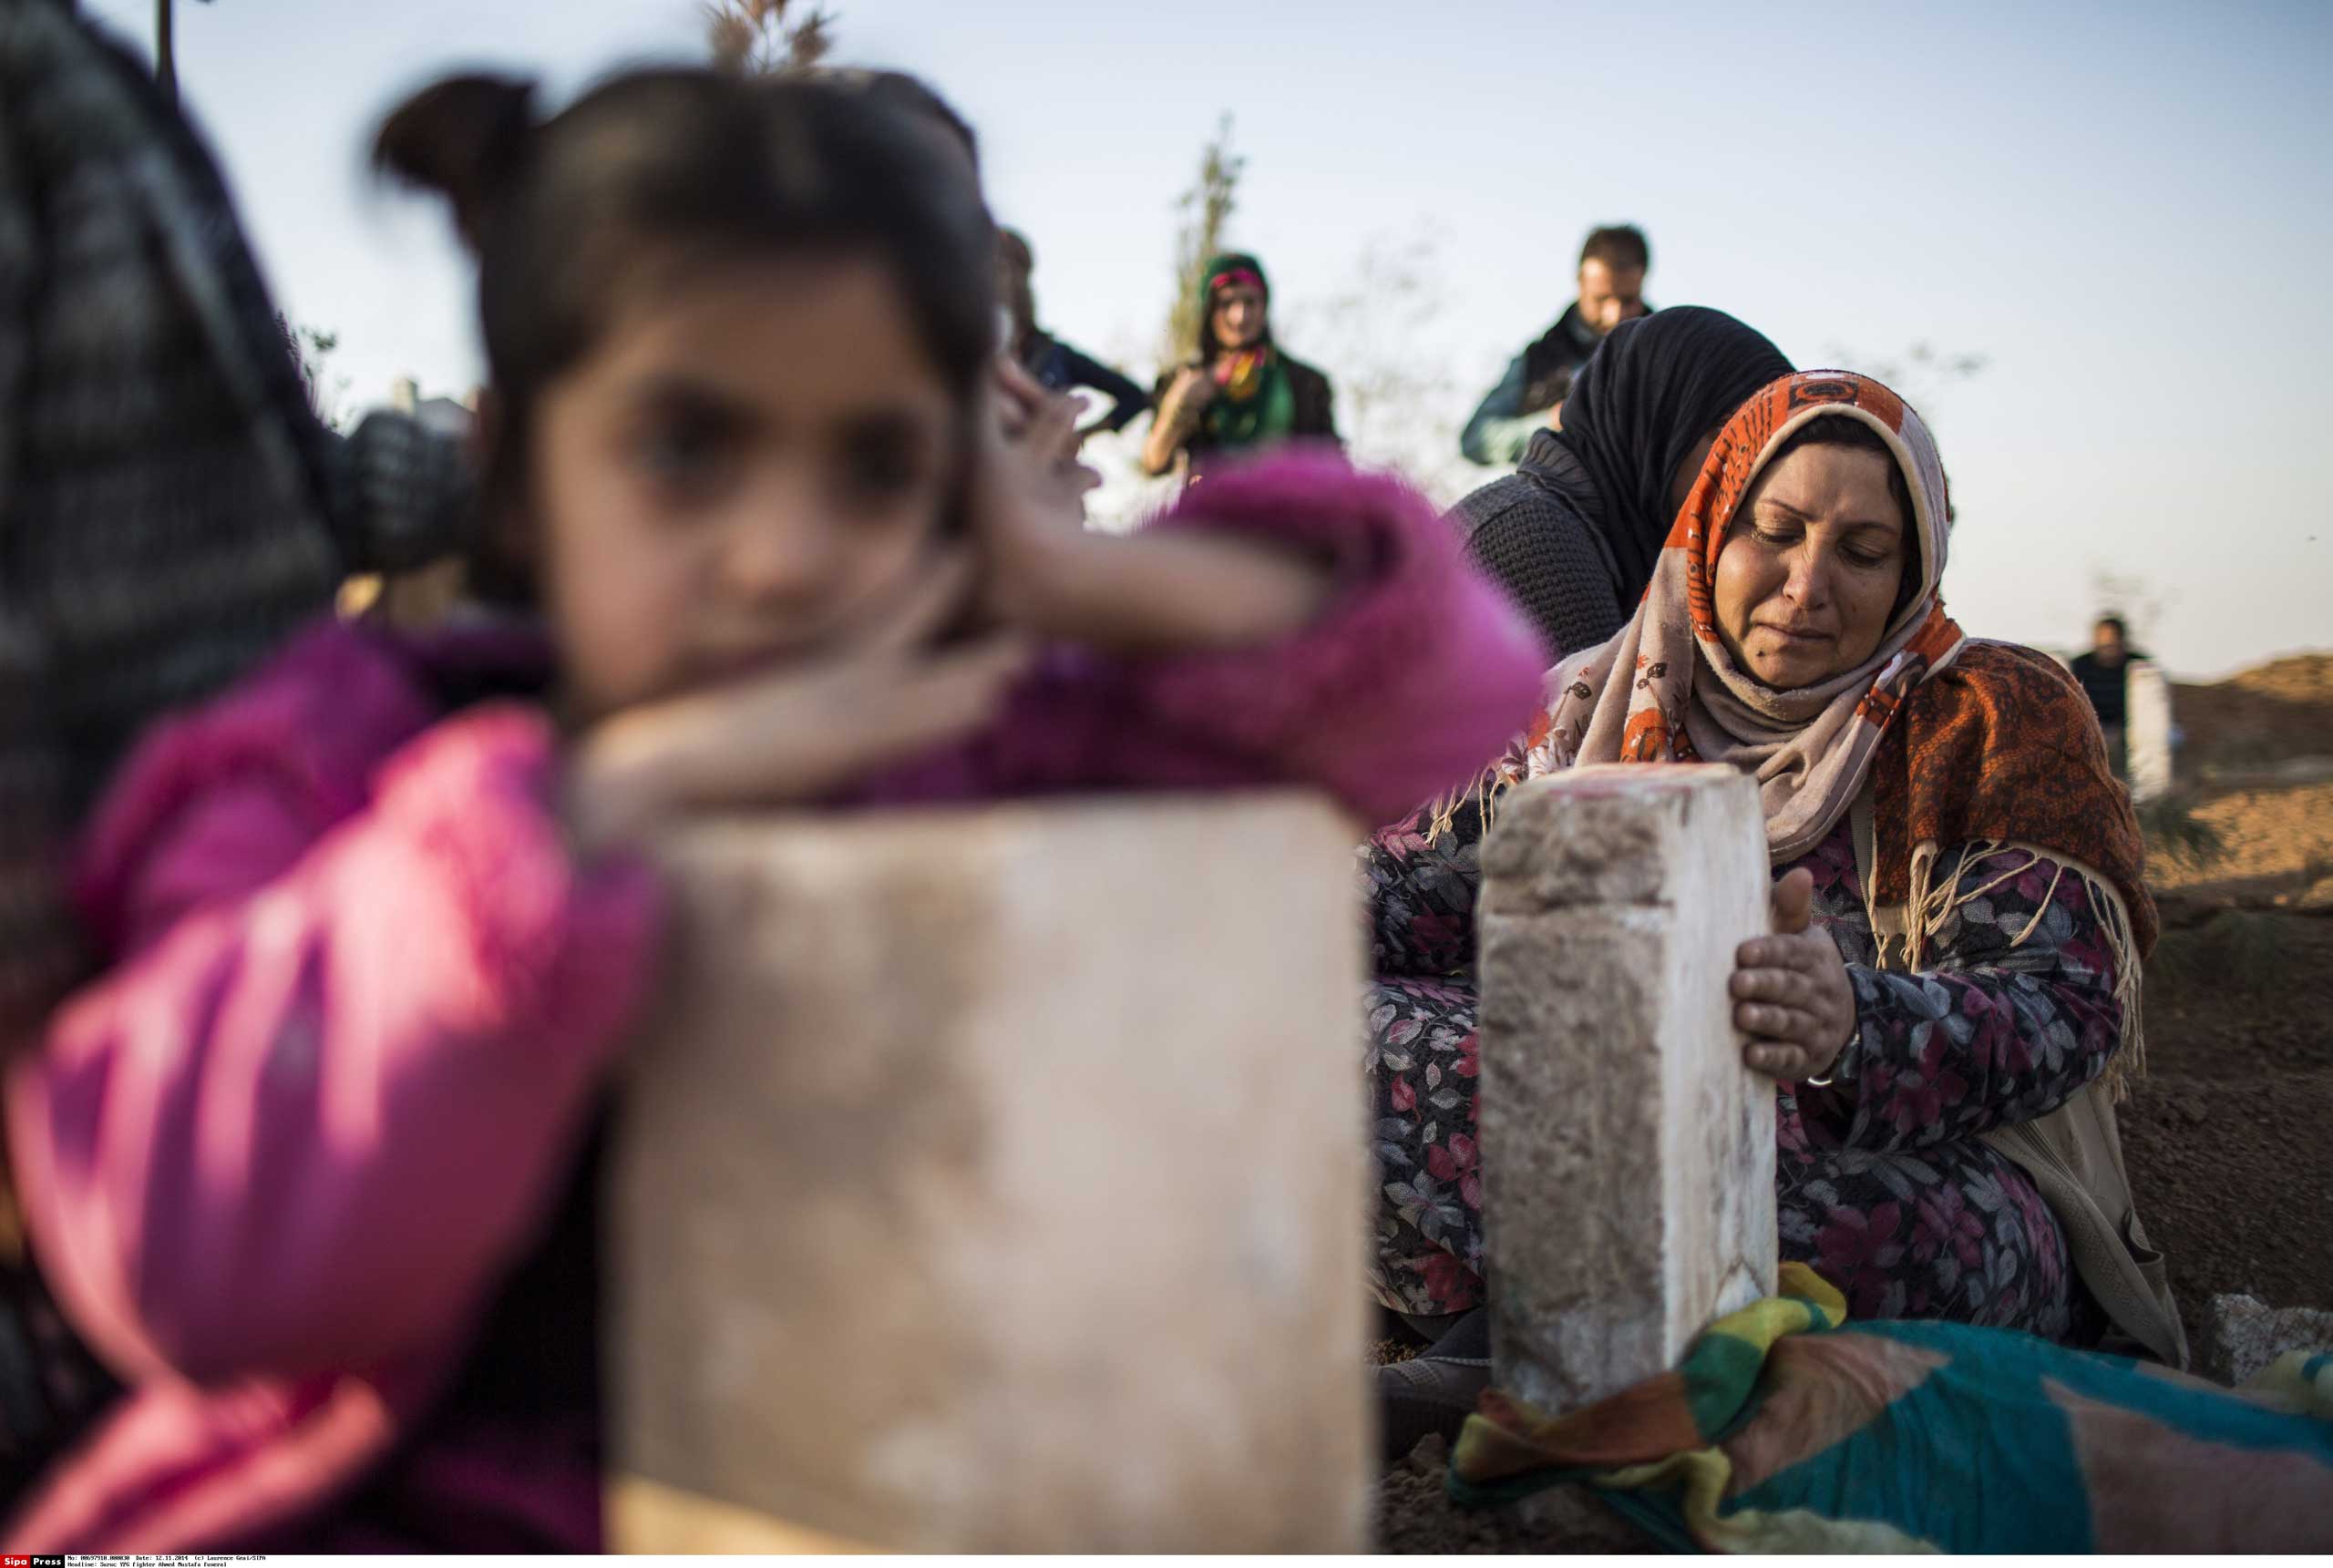 Nov. 12, 2014. Kurdish women sit by a grave of an fighter killed in clashes with the Islamic State (ISIS) forces during the funeral of People's Protection Units fighter Ahmed Mustafa, who died after being injured while fighting in the Syrian city of Kobani, in Suruc, on the Turkey-Syria border.